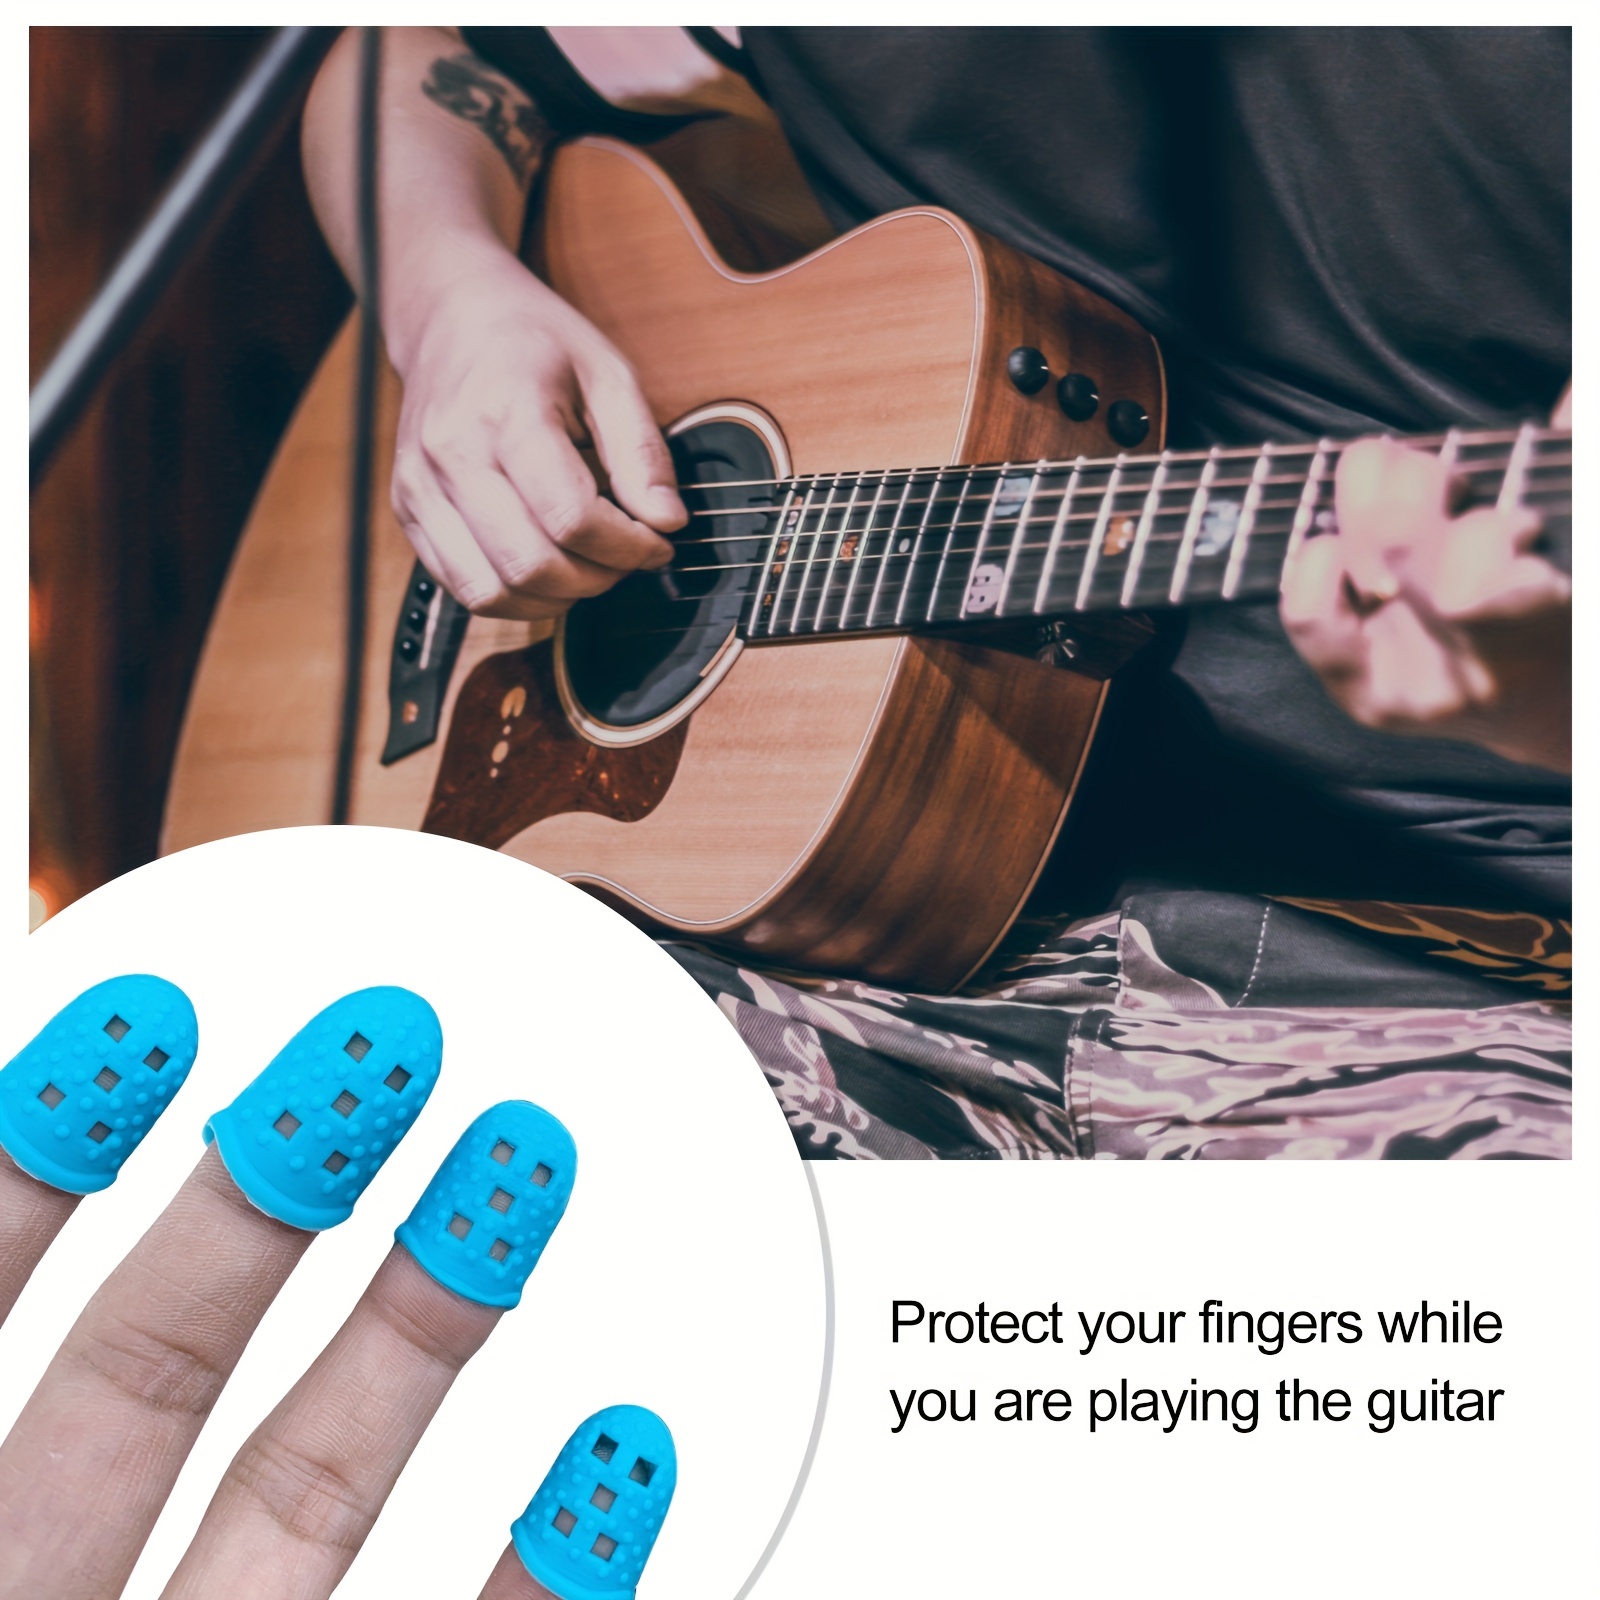 24 Pieces Rubber Fingers Tips Guard with 3 Sizes (S/M/L) Finger Protector  Covers Caps for Paperwork, Cutting, Wax Carving, Guitar Playing and Office